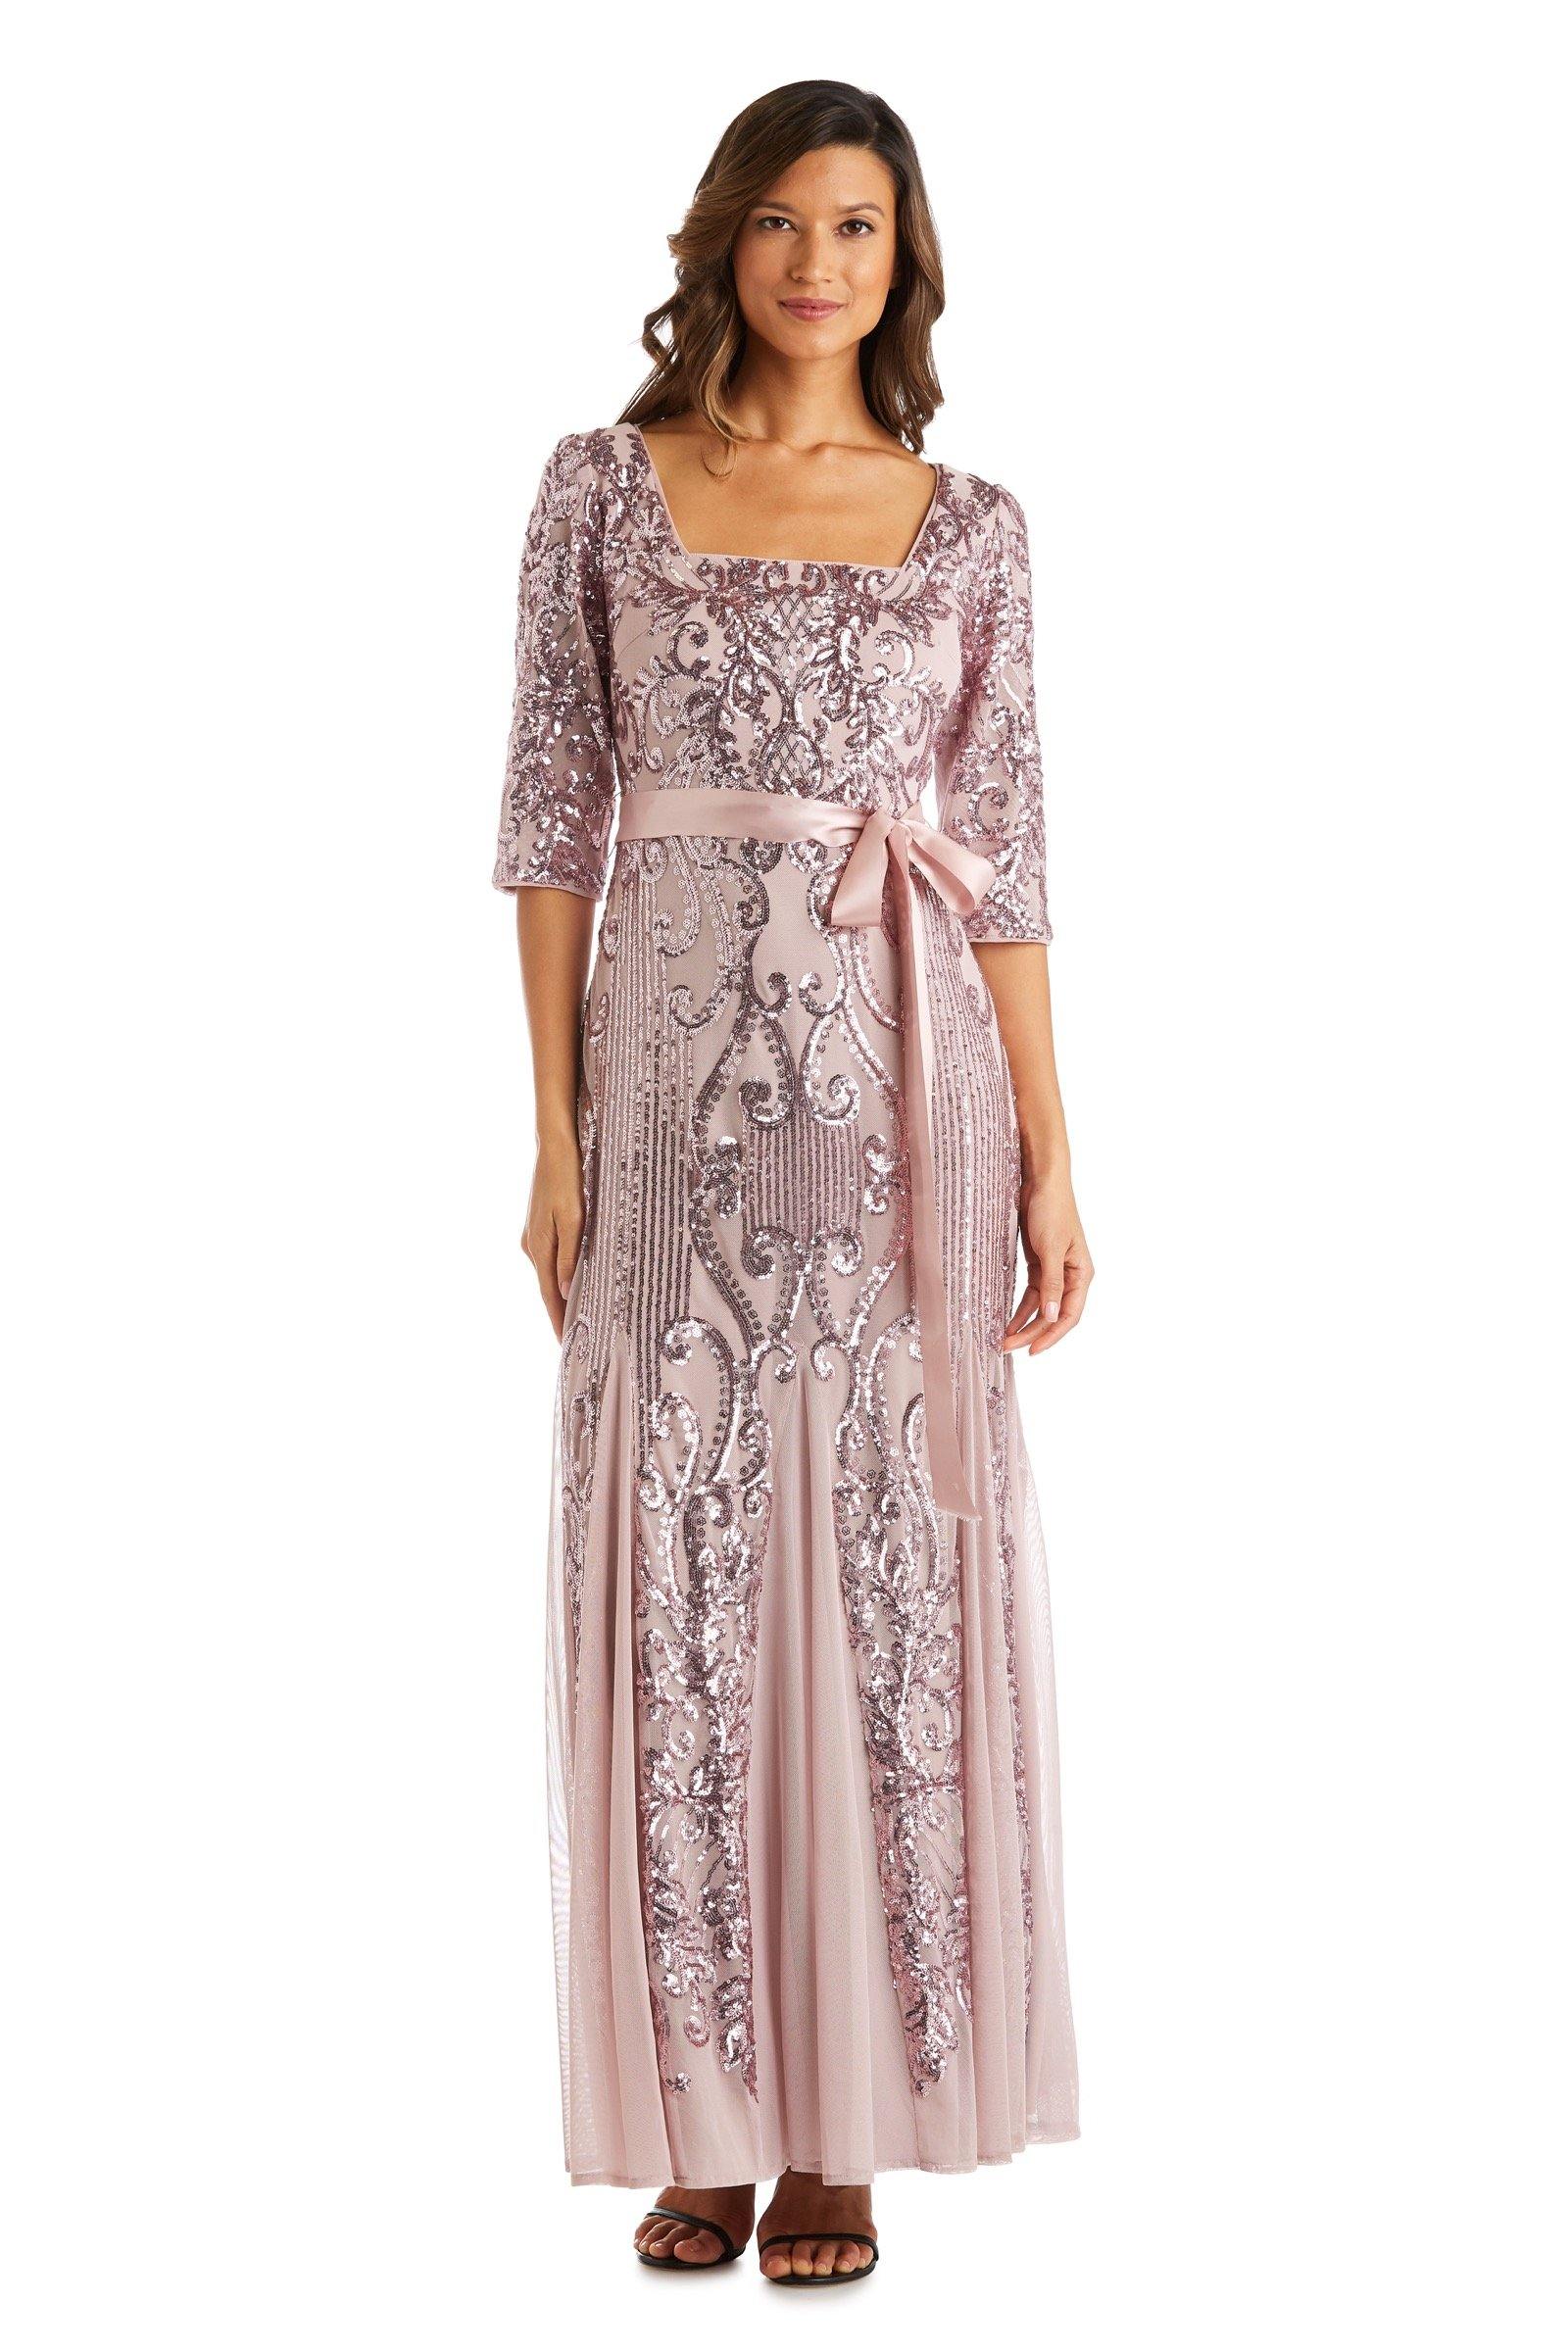 R&M Richards Mother of the Bride Long Dress 7085 - The Dress Outlet